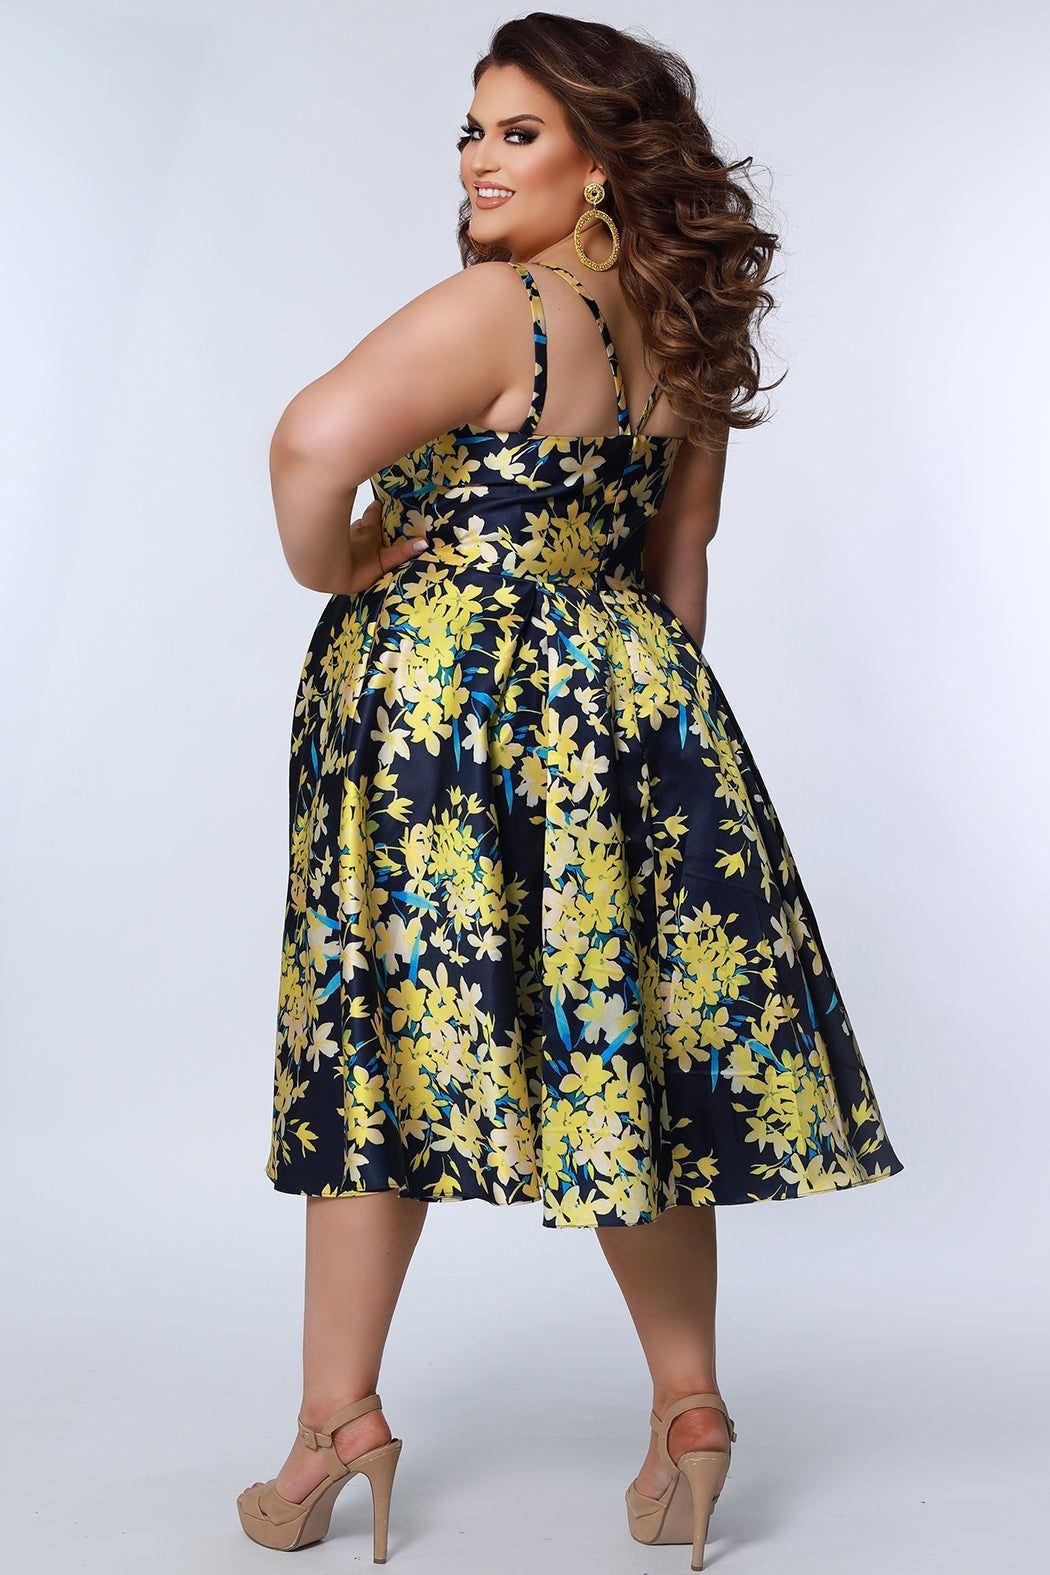 Style CE2209 Sydney's Closet Plus Size 18 Prom Satin Yellow Cocktail Dress on Queenly